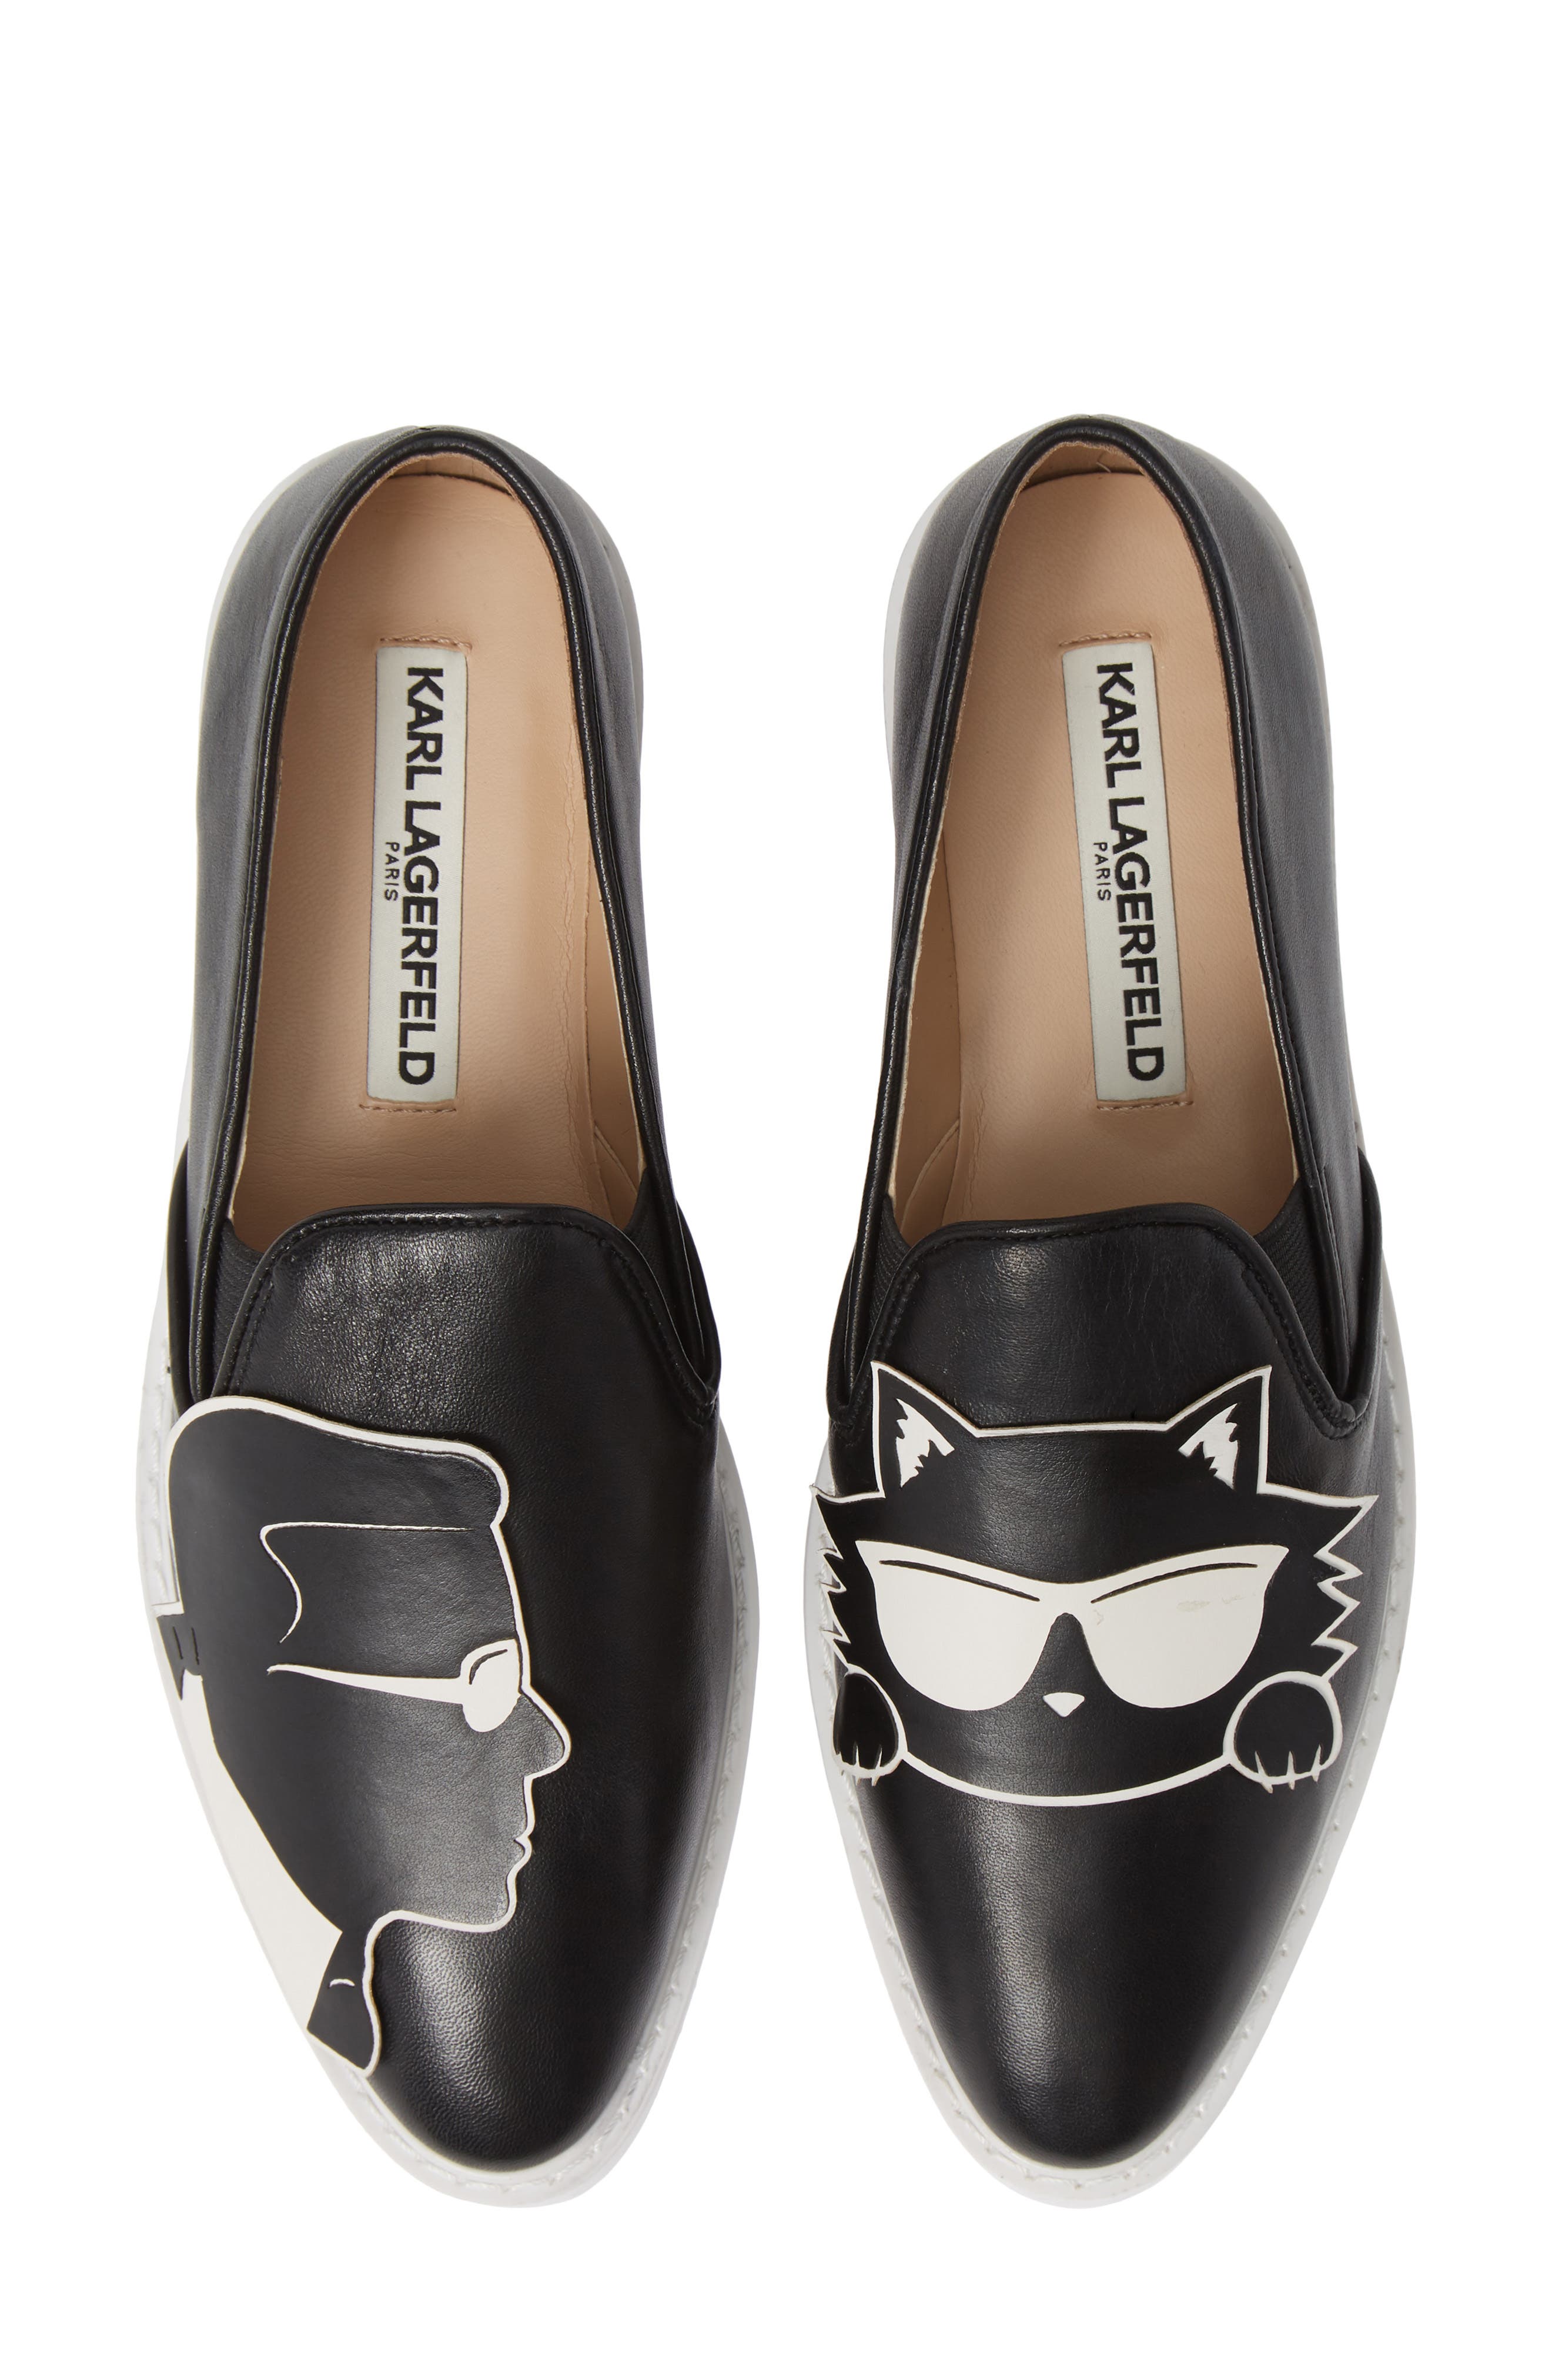 karl lagerfeld cat shoes